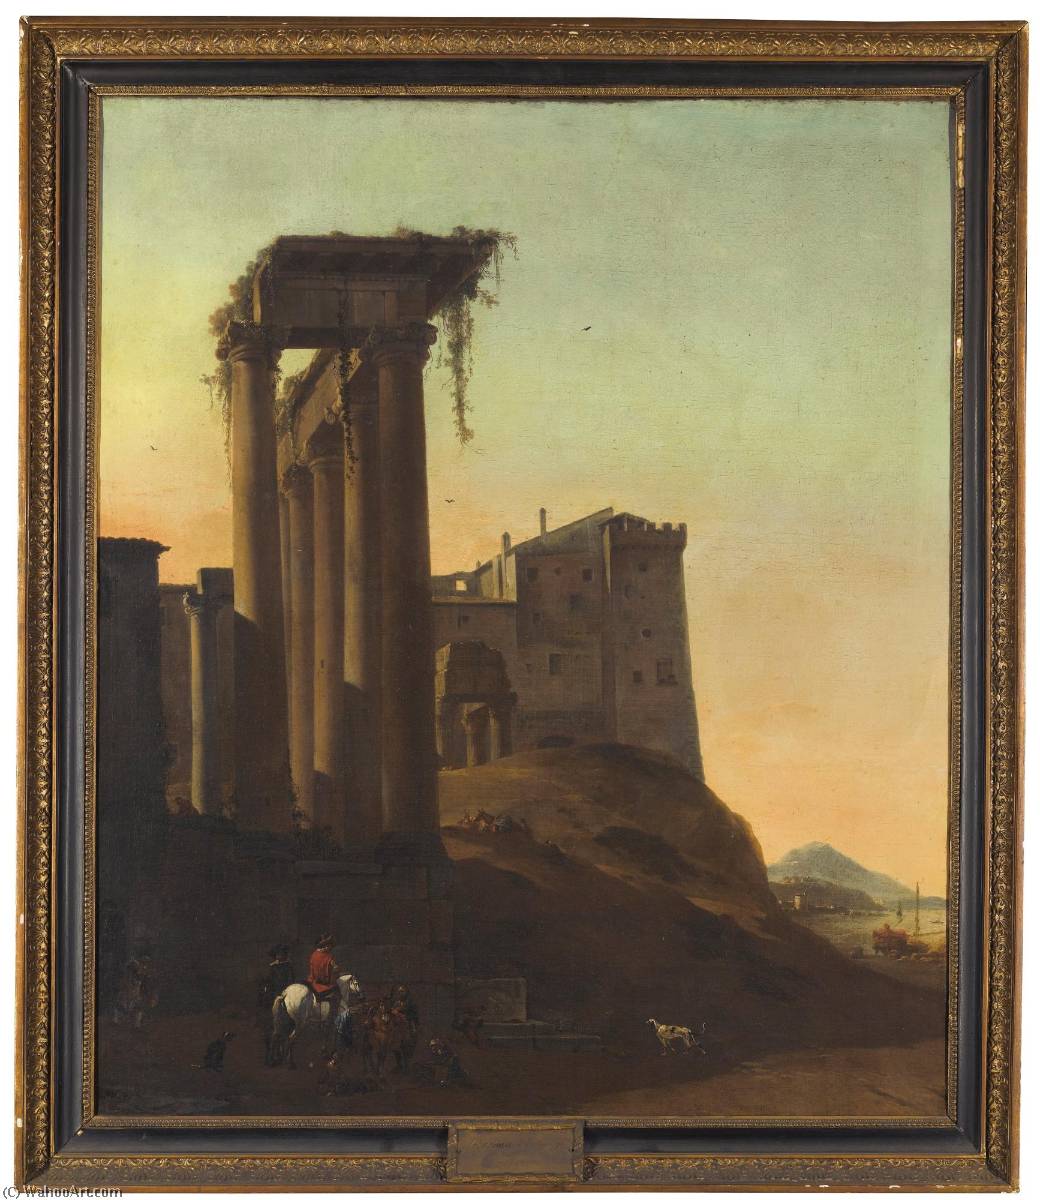 WikiOO.org - 백과 사전 - 회화, 삽화 Thomas Wyck - Riders by Italianate ruins with a seaport beyond